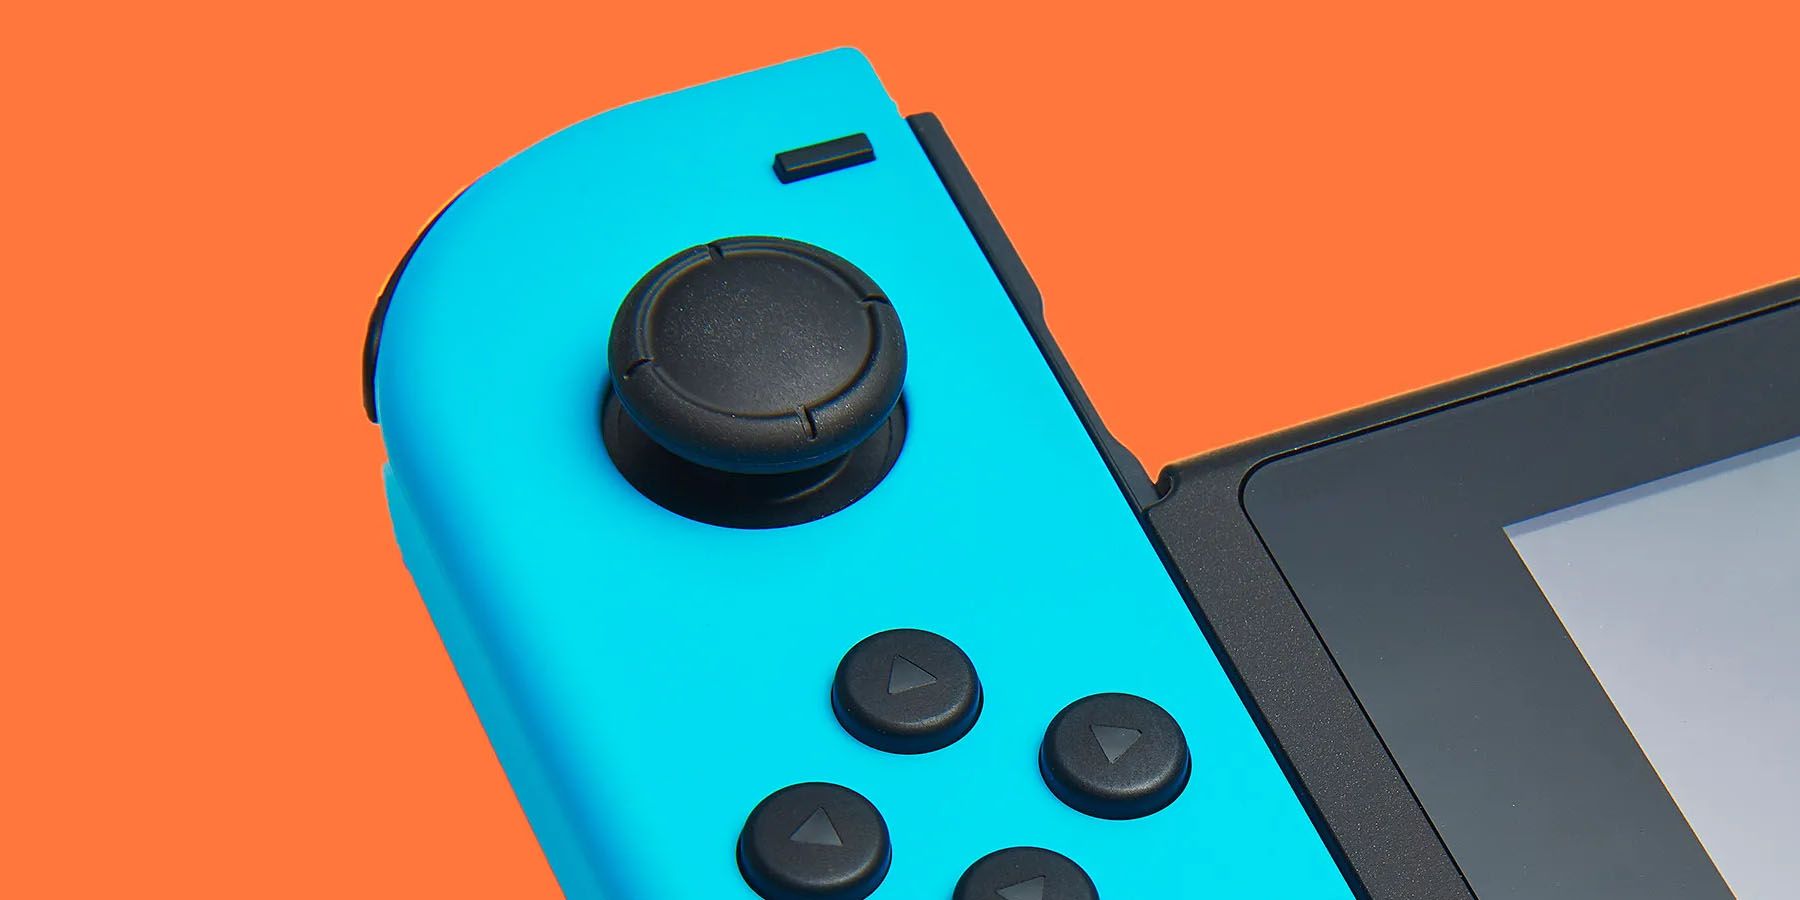 A close-up image of a blue Nintendo Joy-Con controller against an orange background.